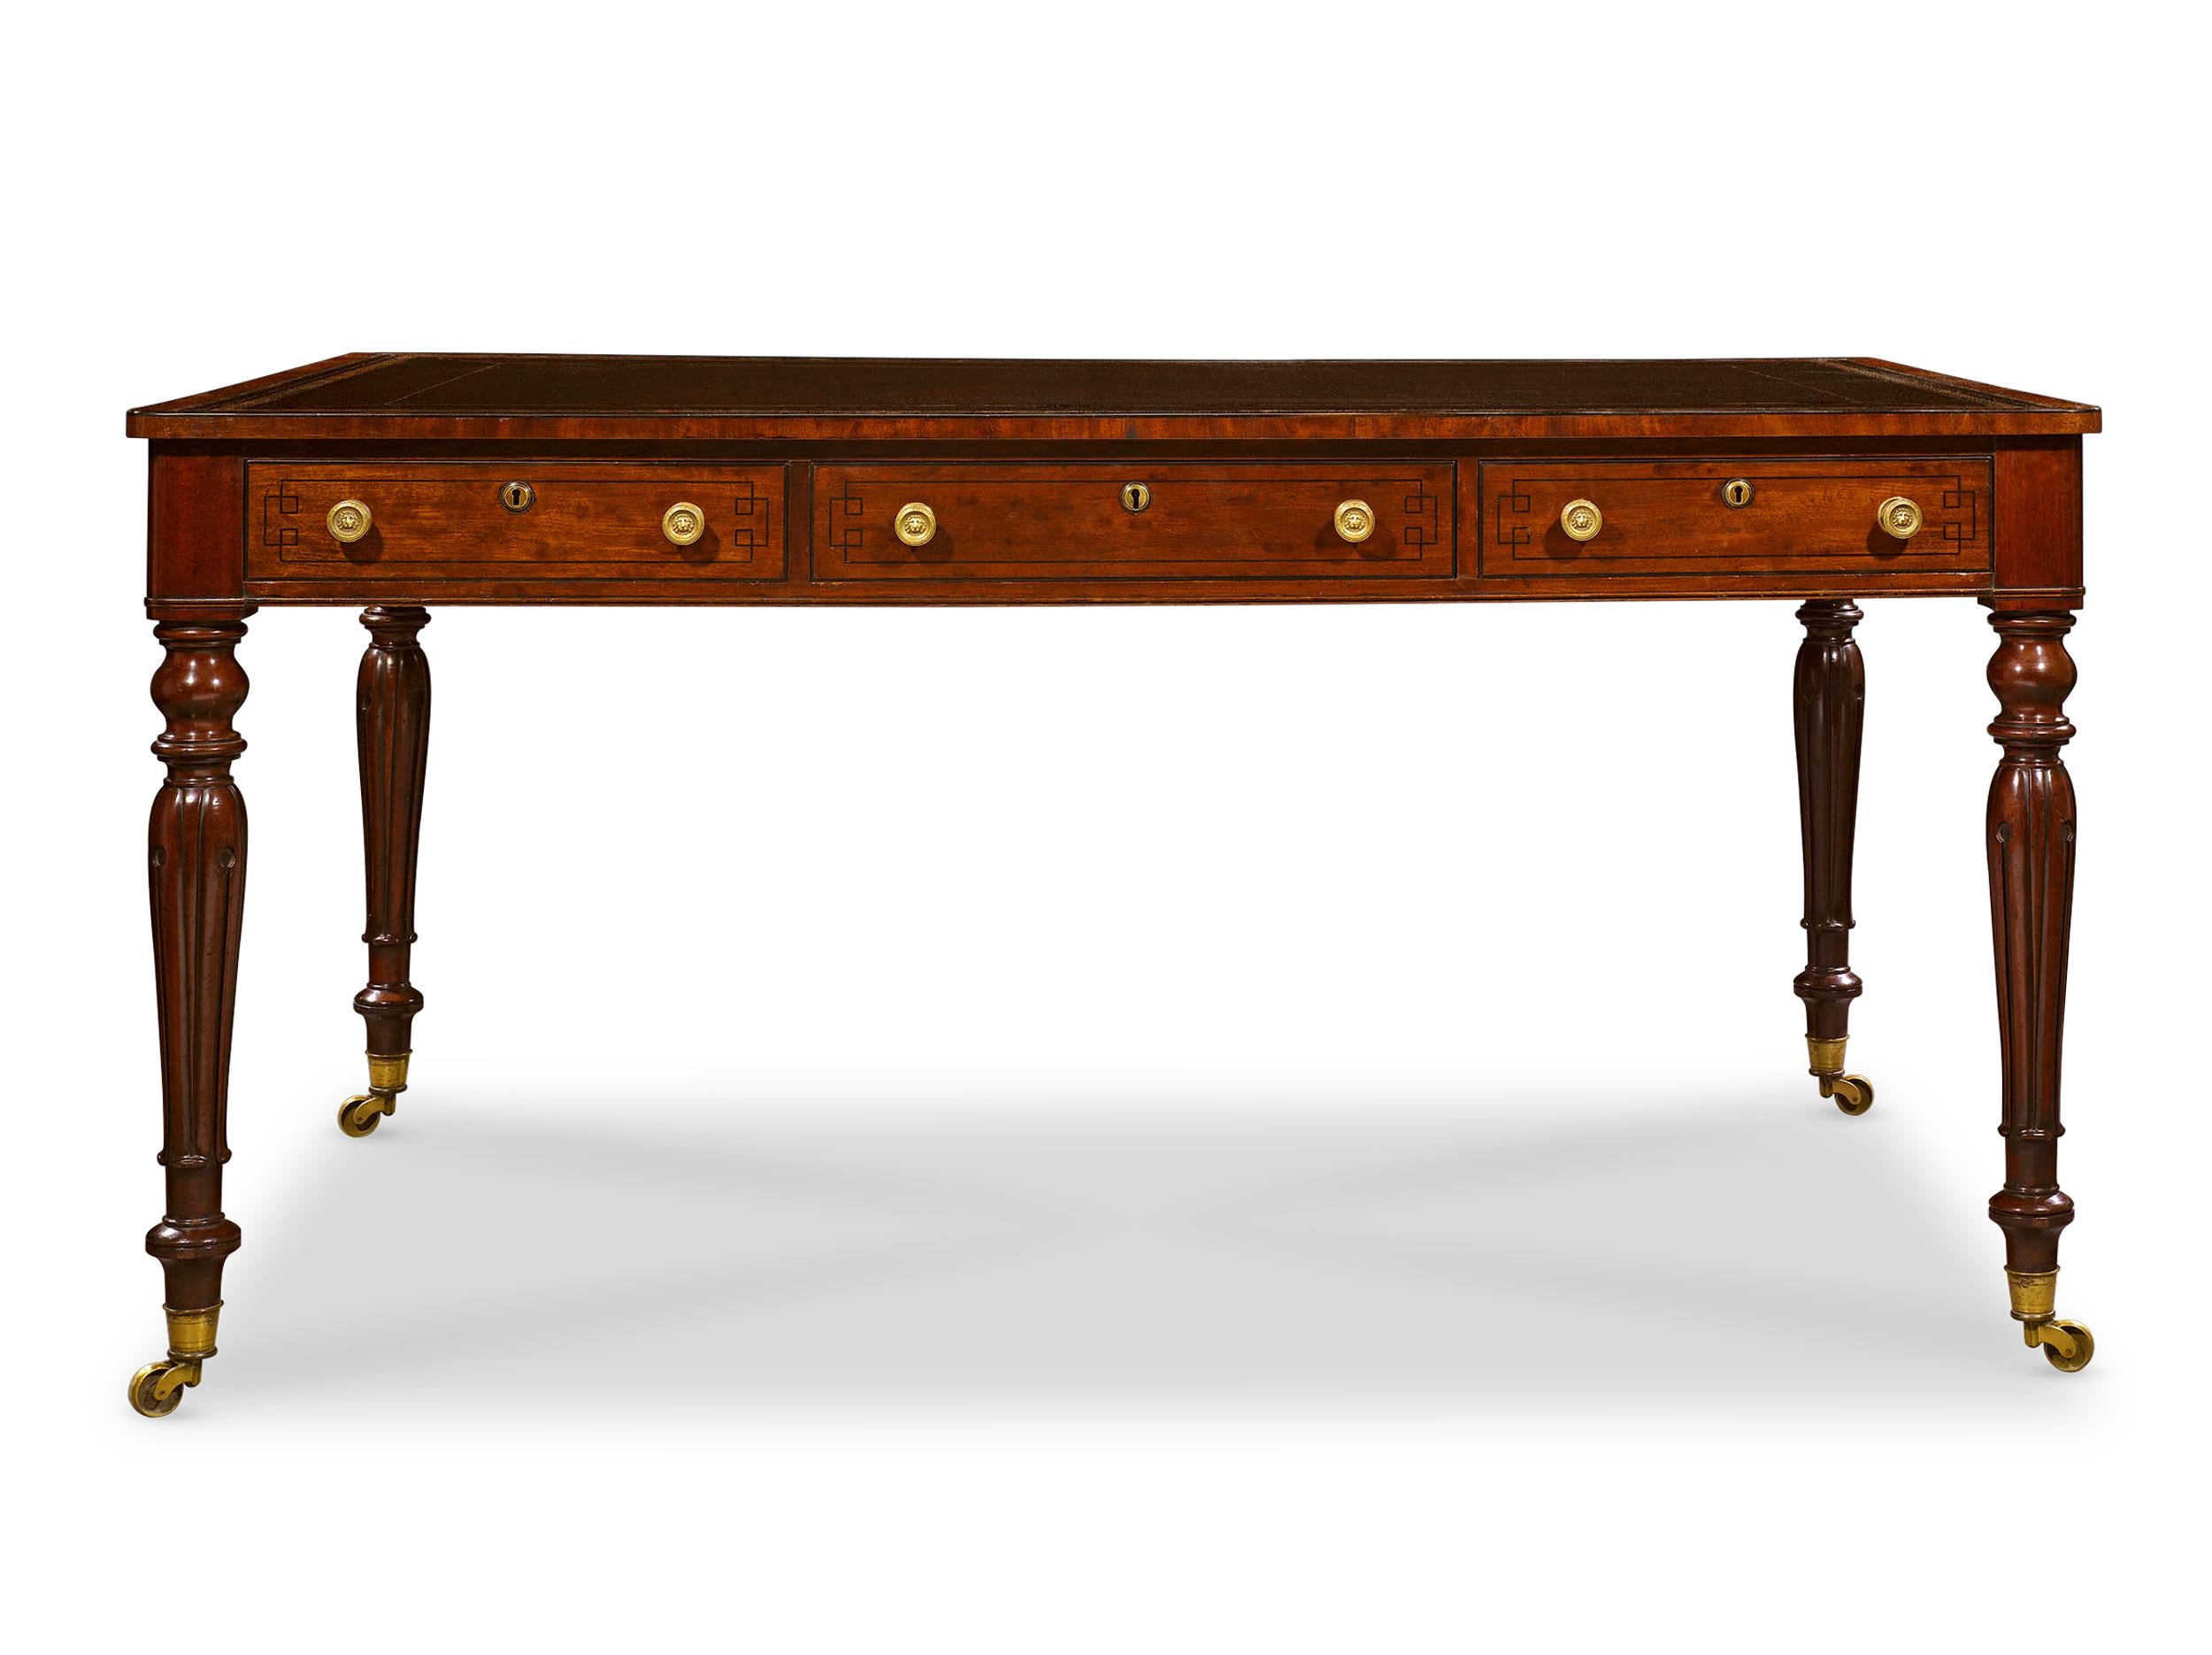 This exquisite writing desk is crafted of rich mahogany and features the straightforward design prevalent in England during the early 19th century. A luxurious leather-covered top presents an ideal writing surface, and three lockable drawers, each